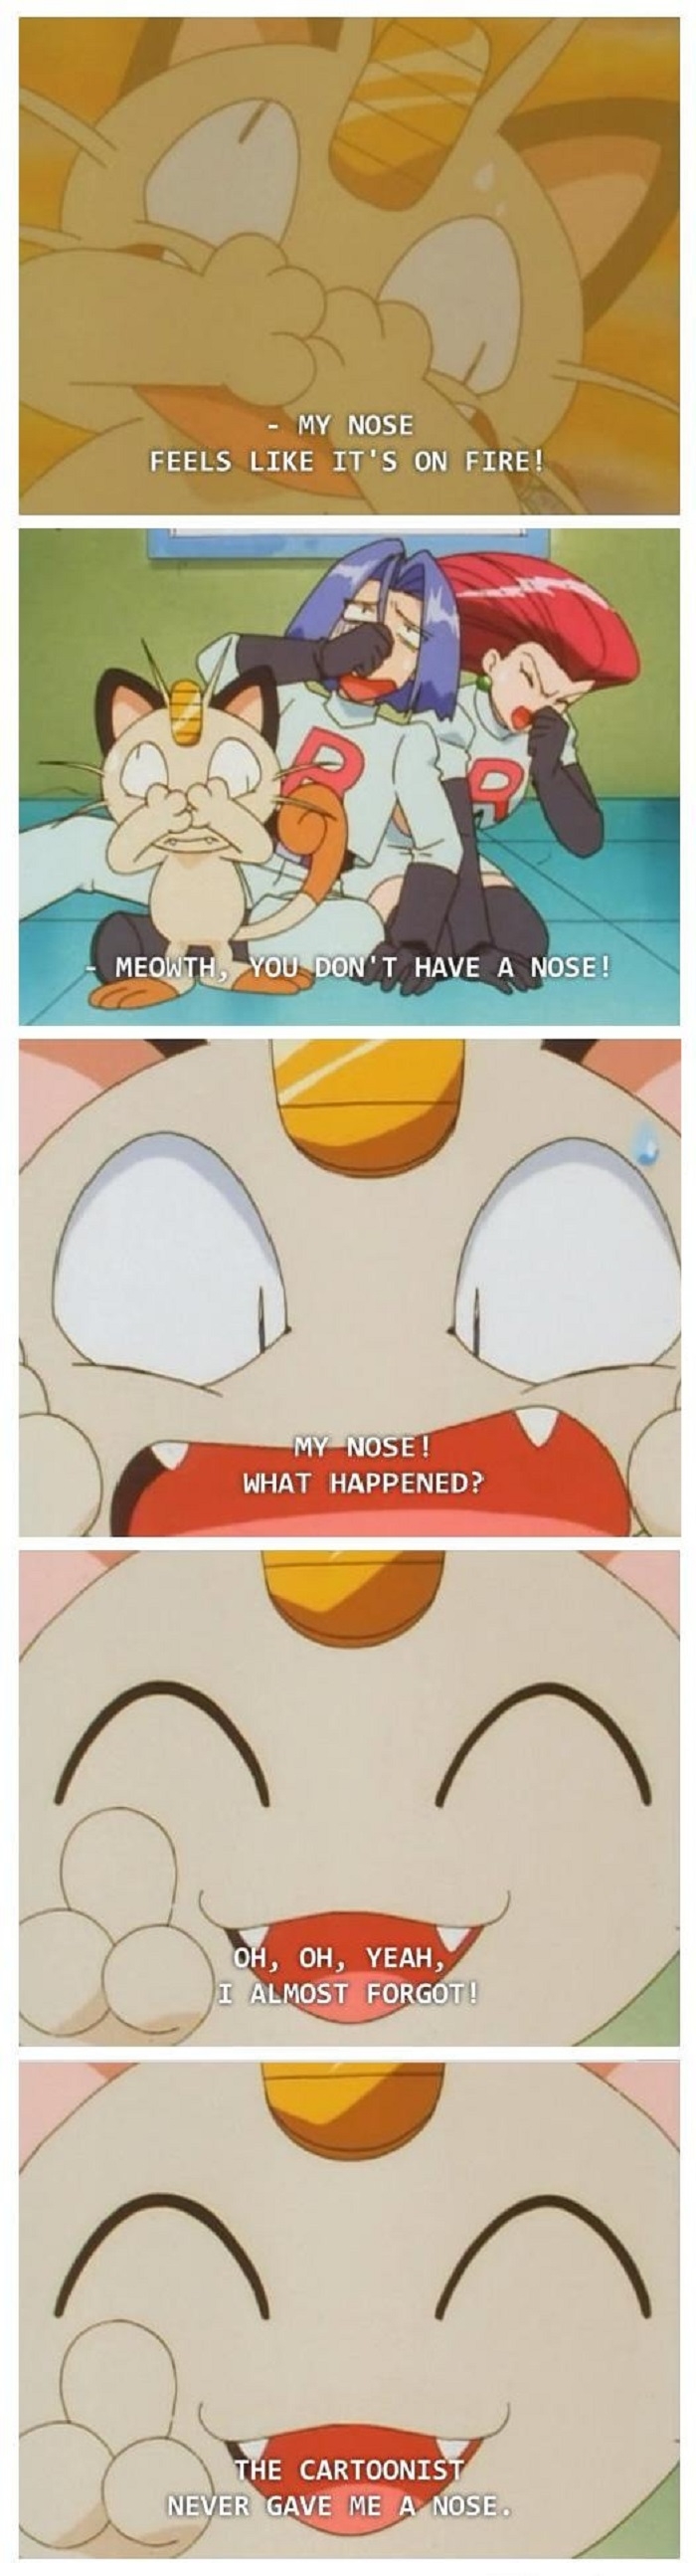 Oh Meowth